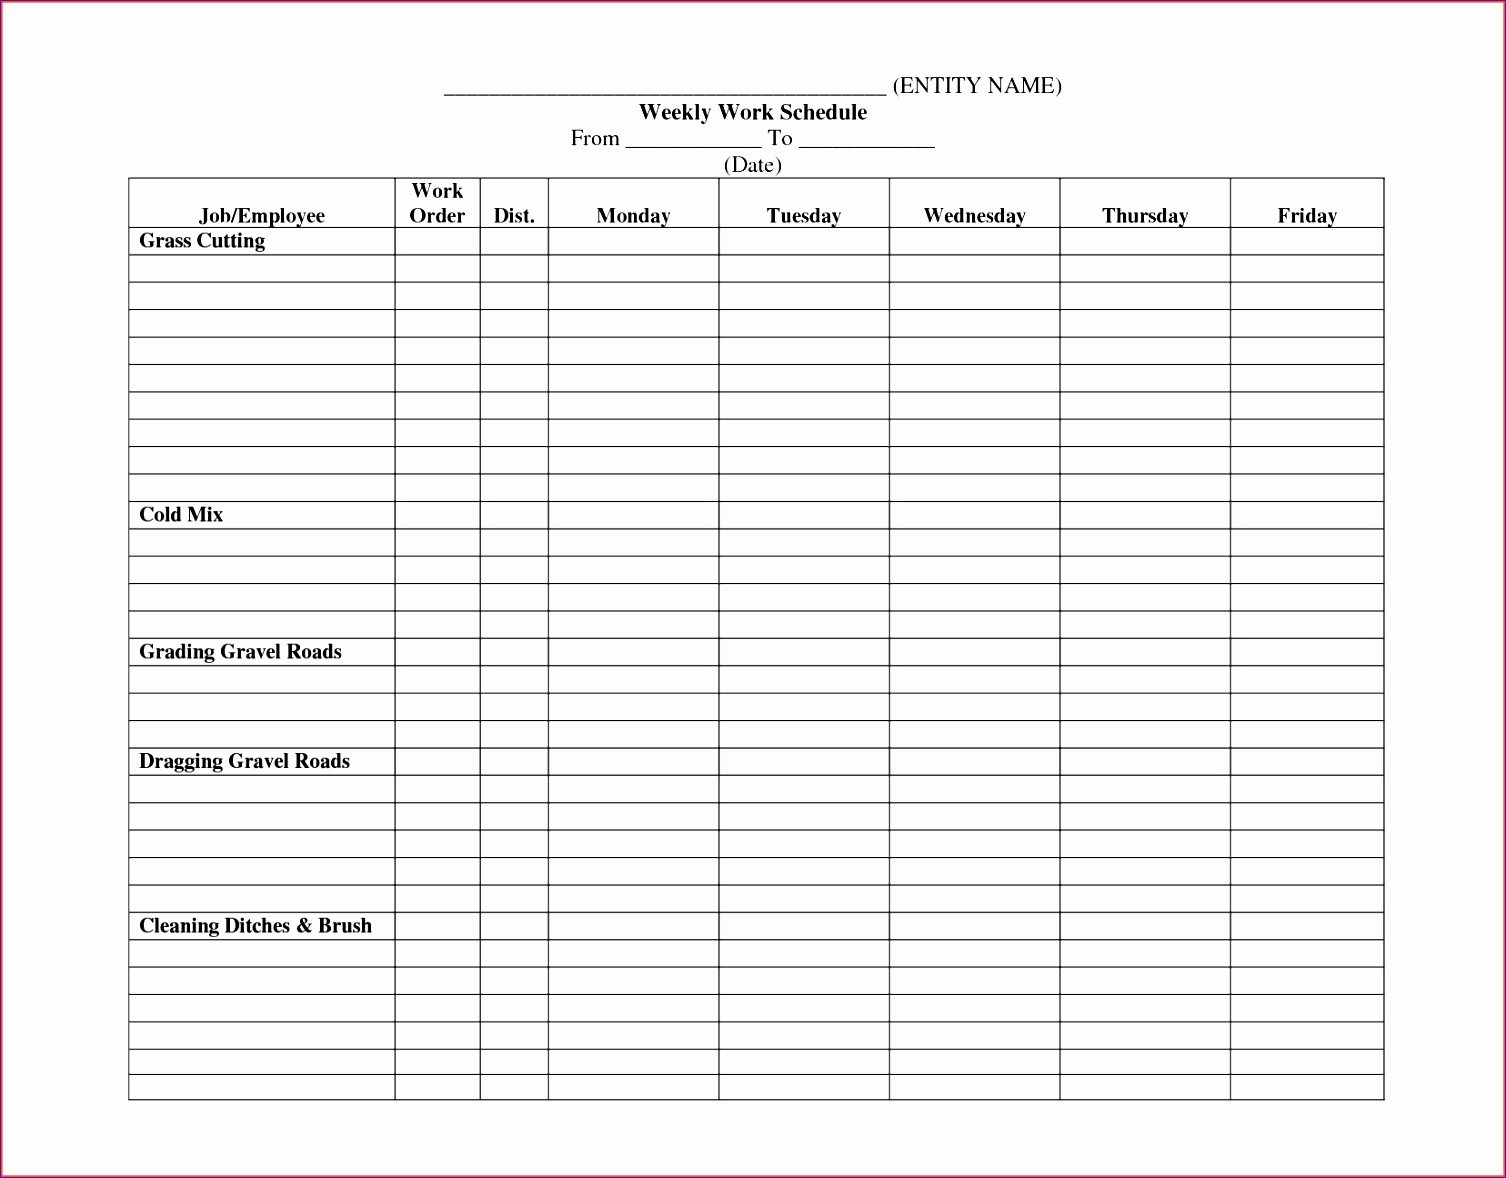 Staffing Plan Template Excel Inspirational 12 Staffing Schedule Template Excel Free Exceltemplates